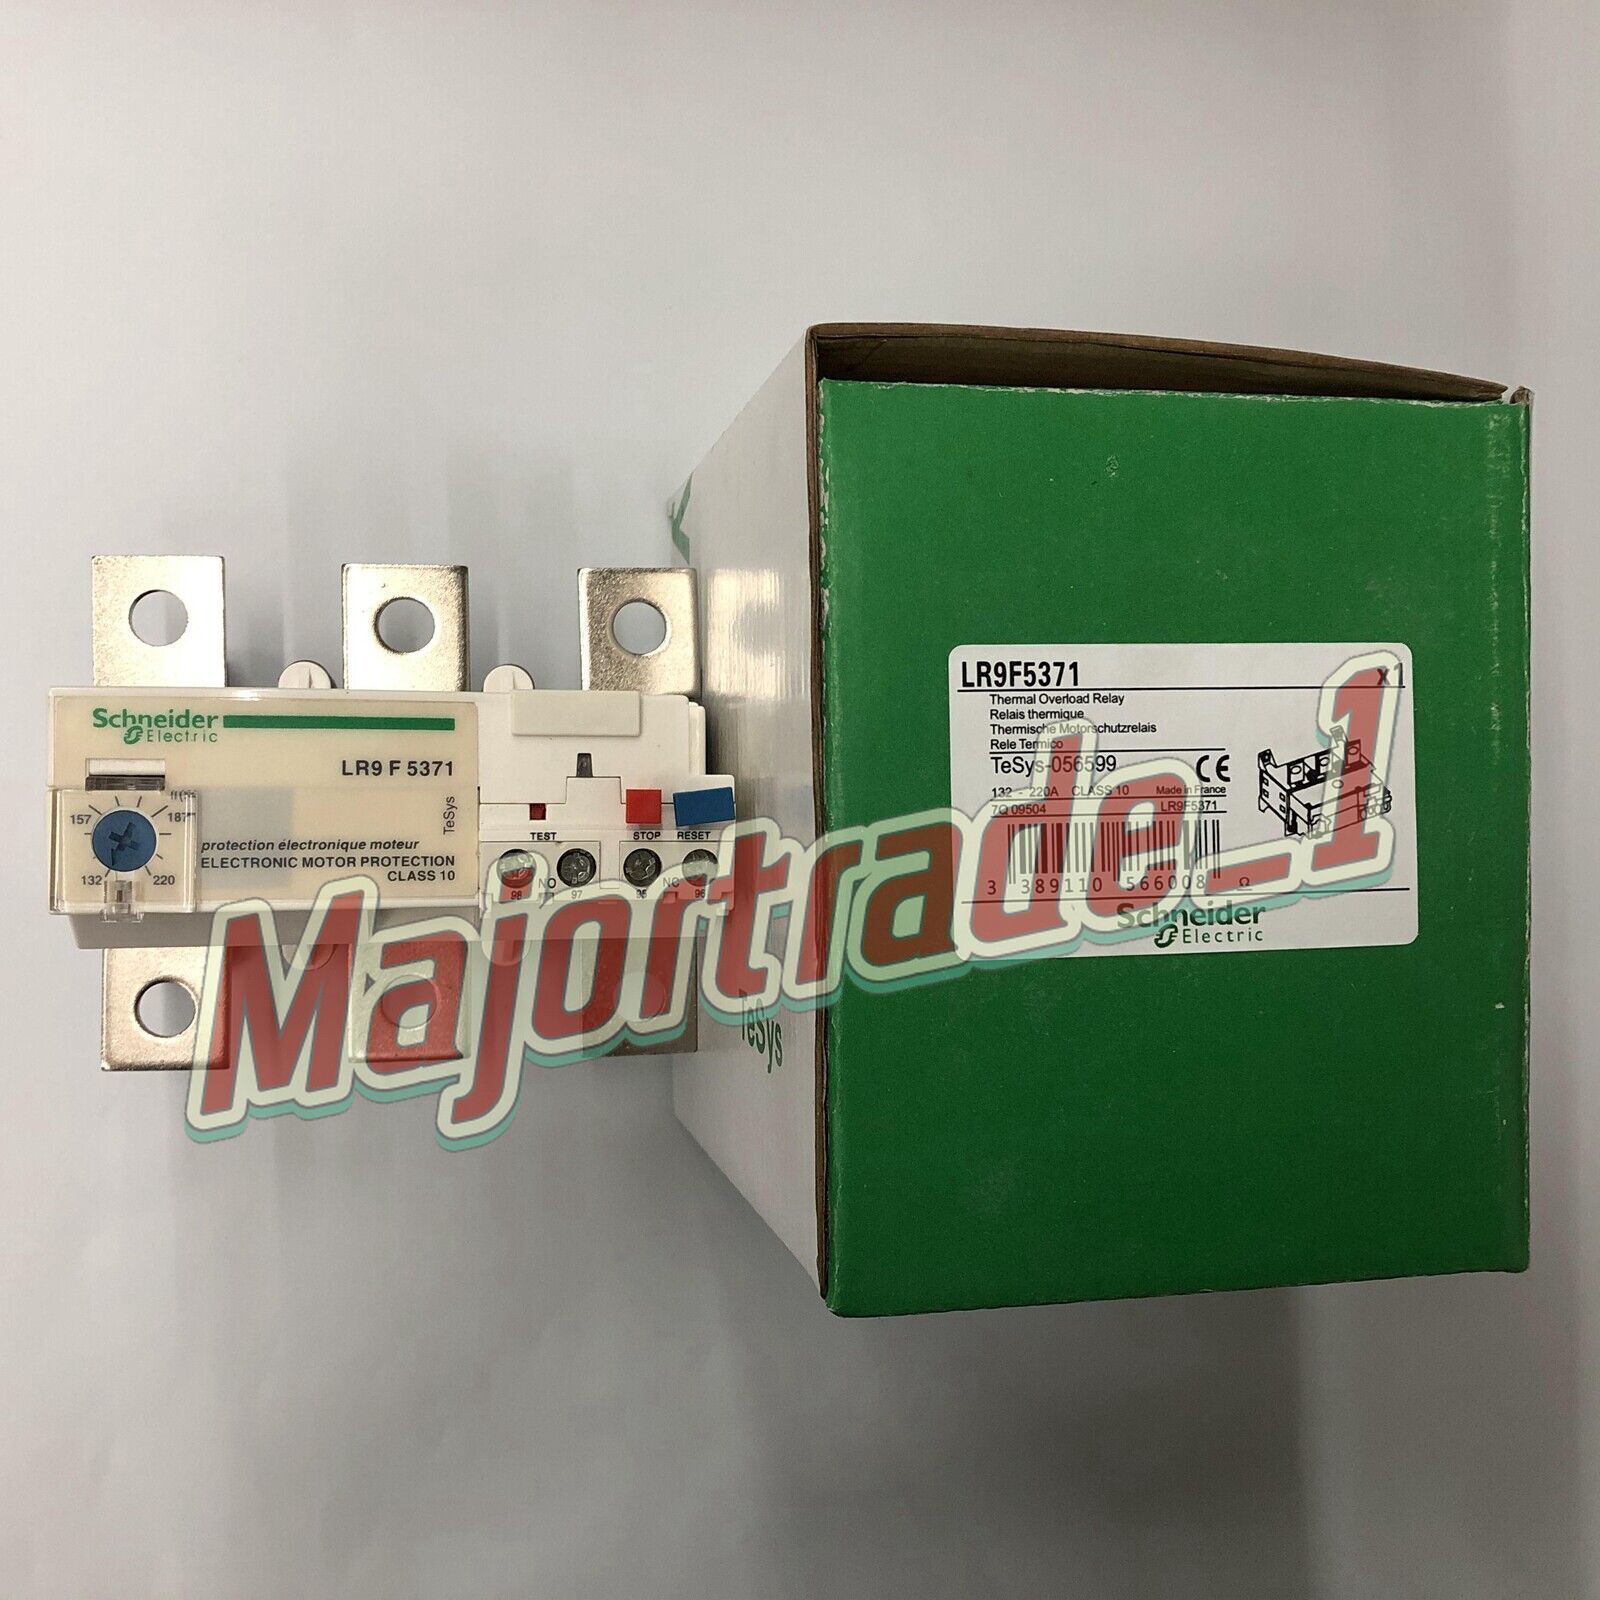 NEW Schneider LR9F5371 Telemecanique Solid State Overload Relay 575VAC 132~220A